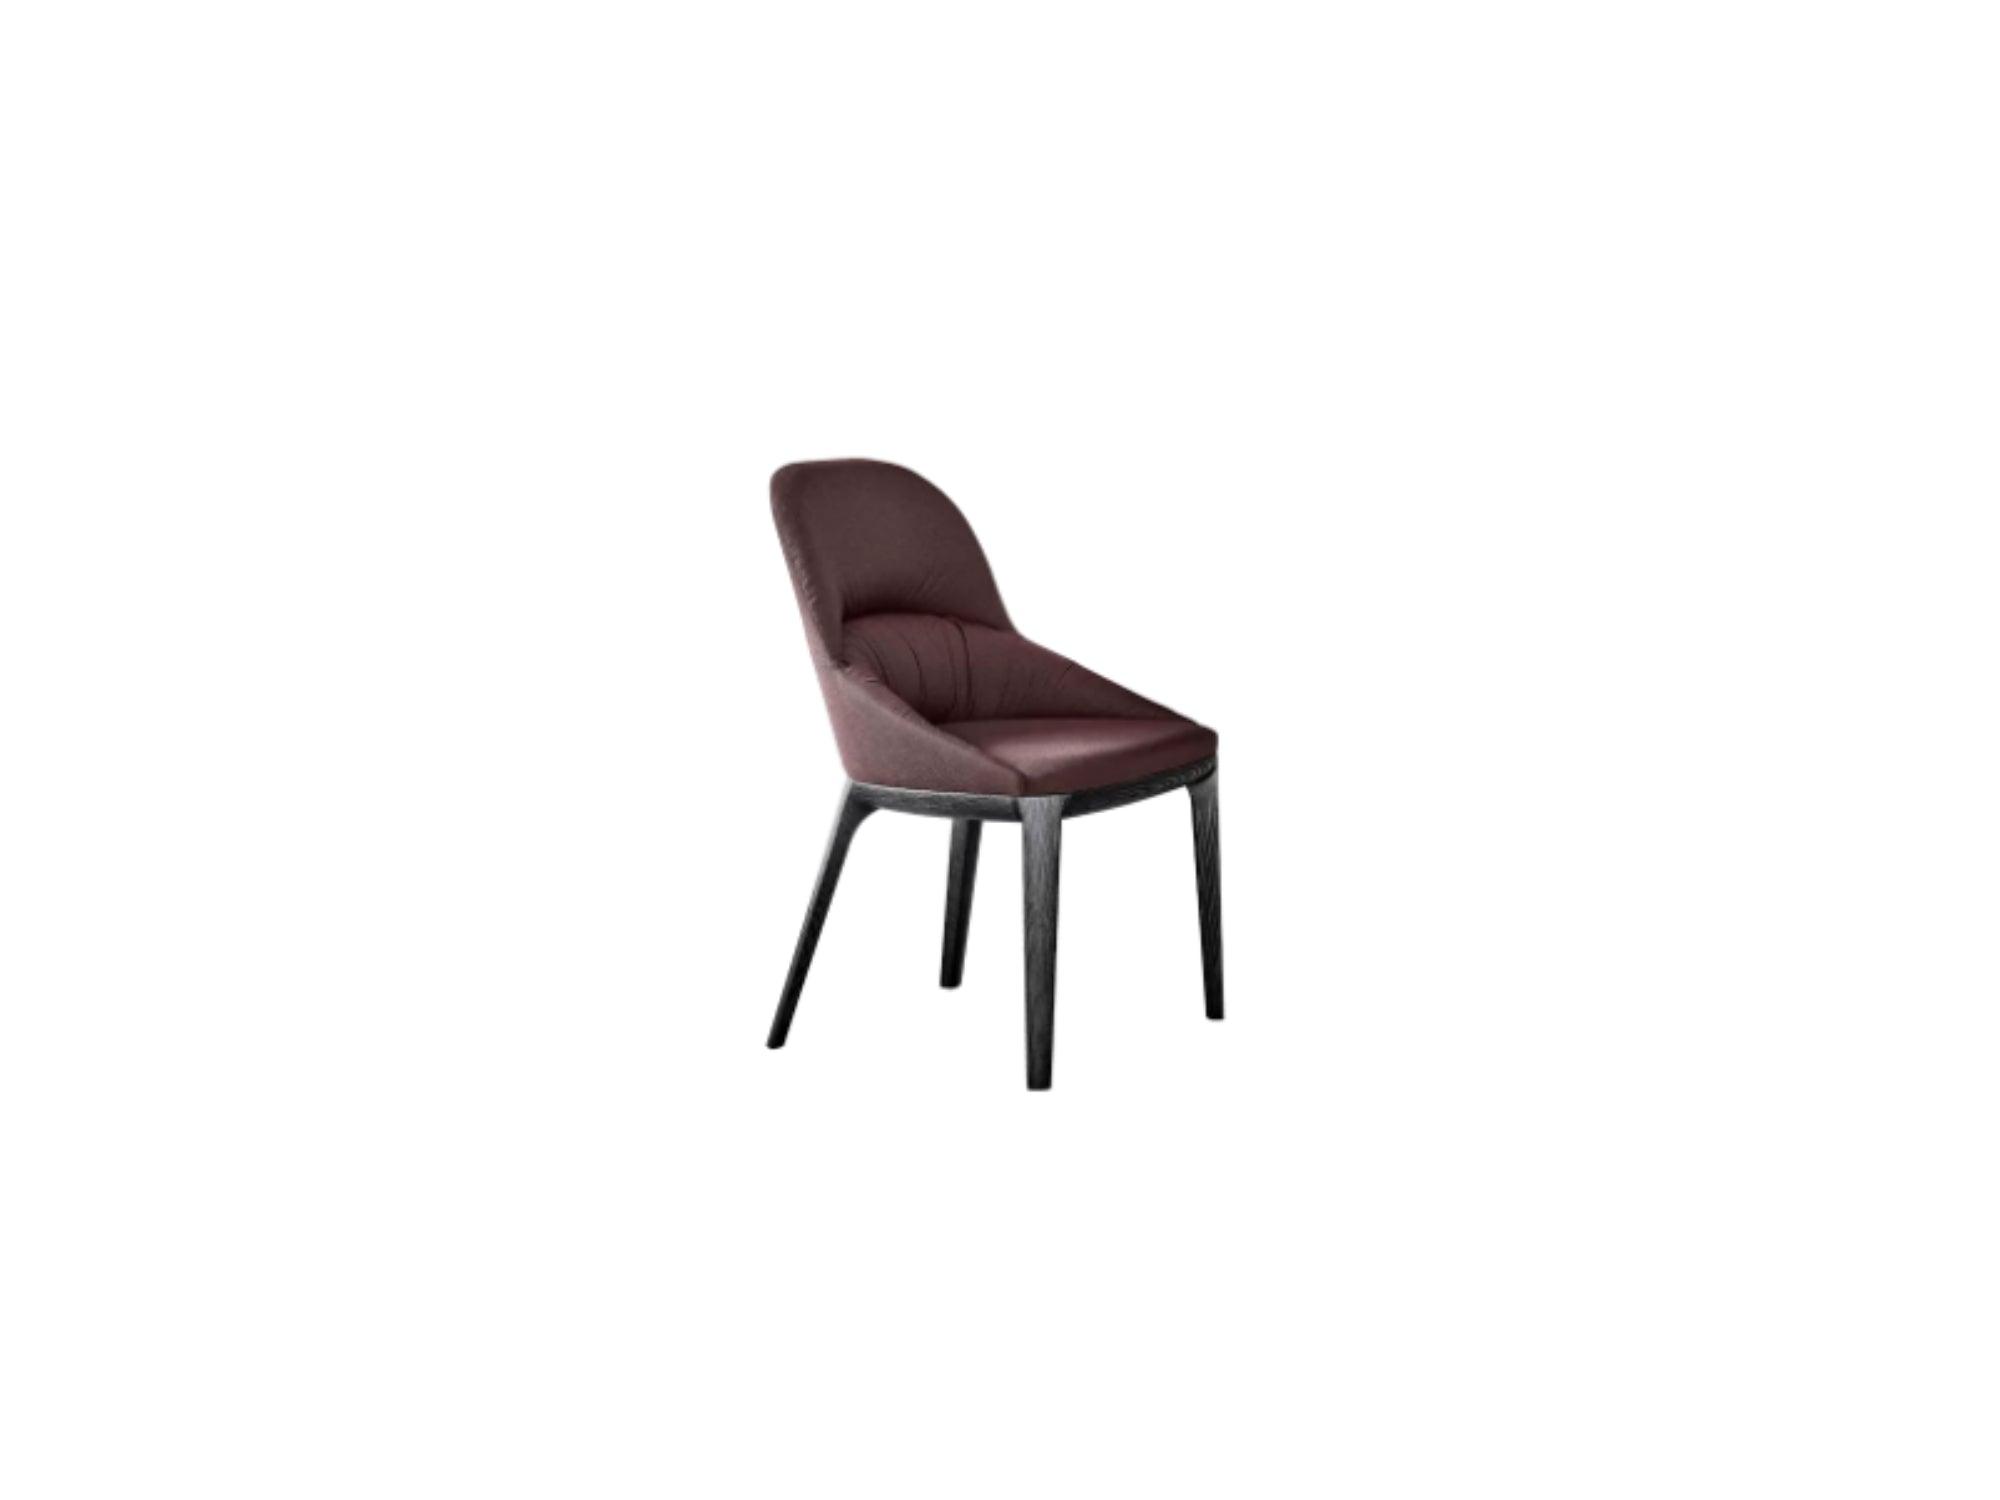 Queen Dining Chair - Euro Living Furniture